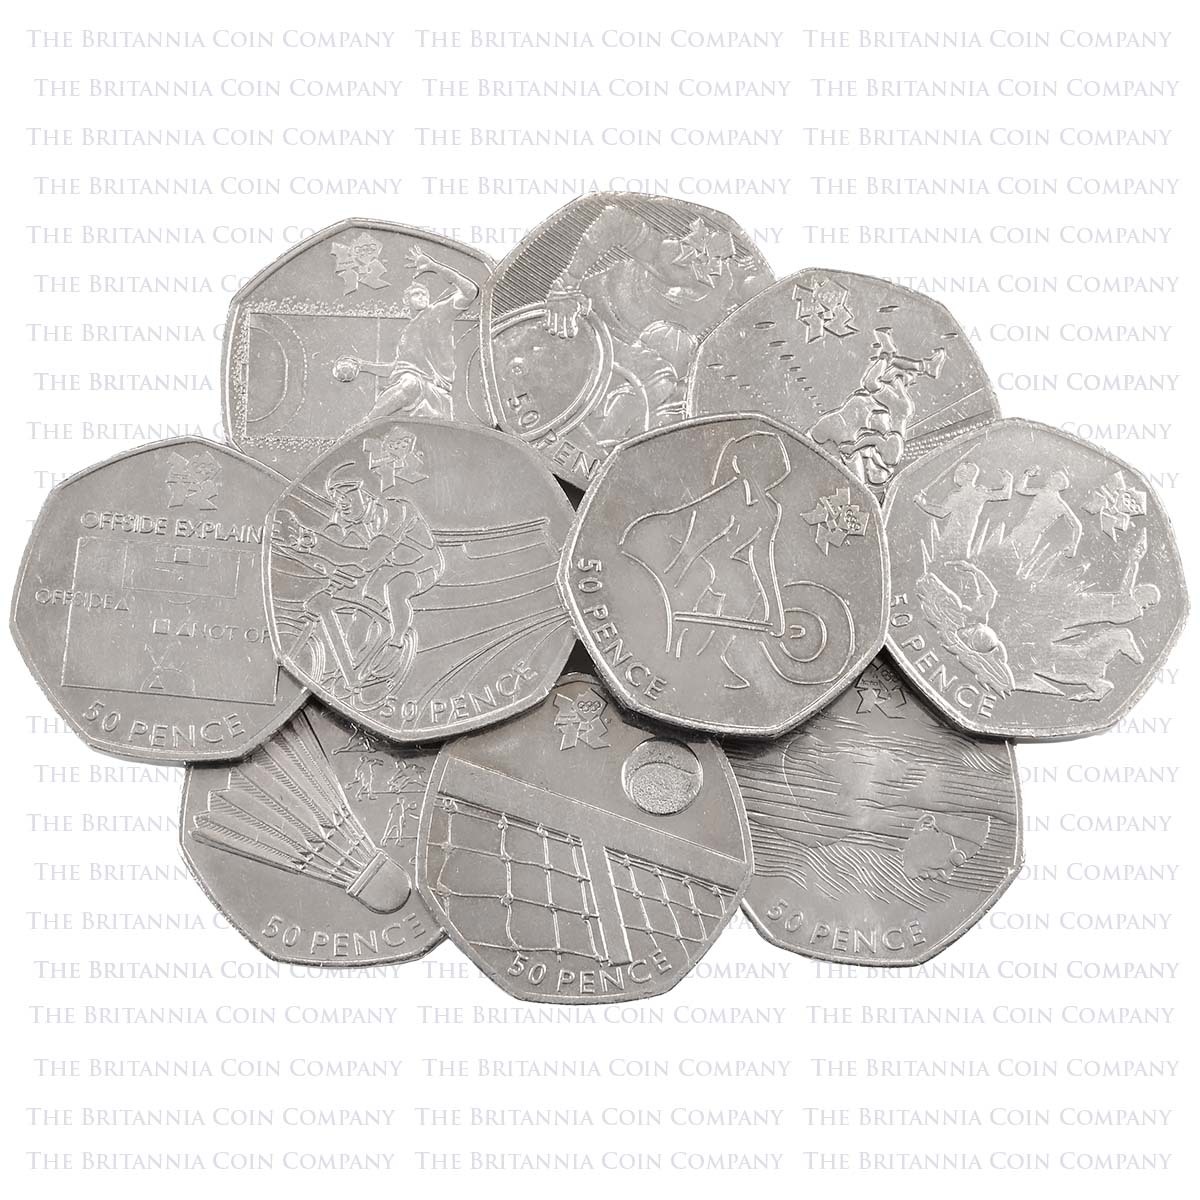 Group of circulated 2011 London Summer Olympics Fifty Pence pieces from The Royal Mint.